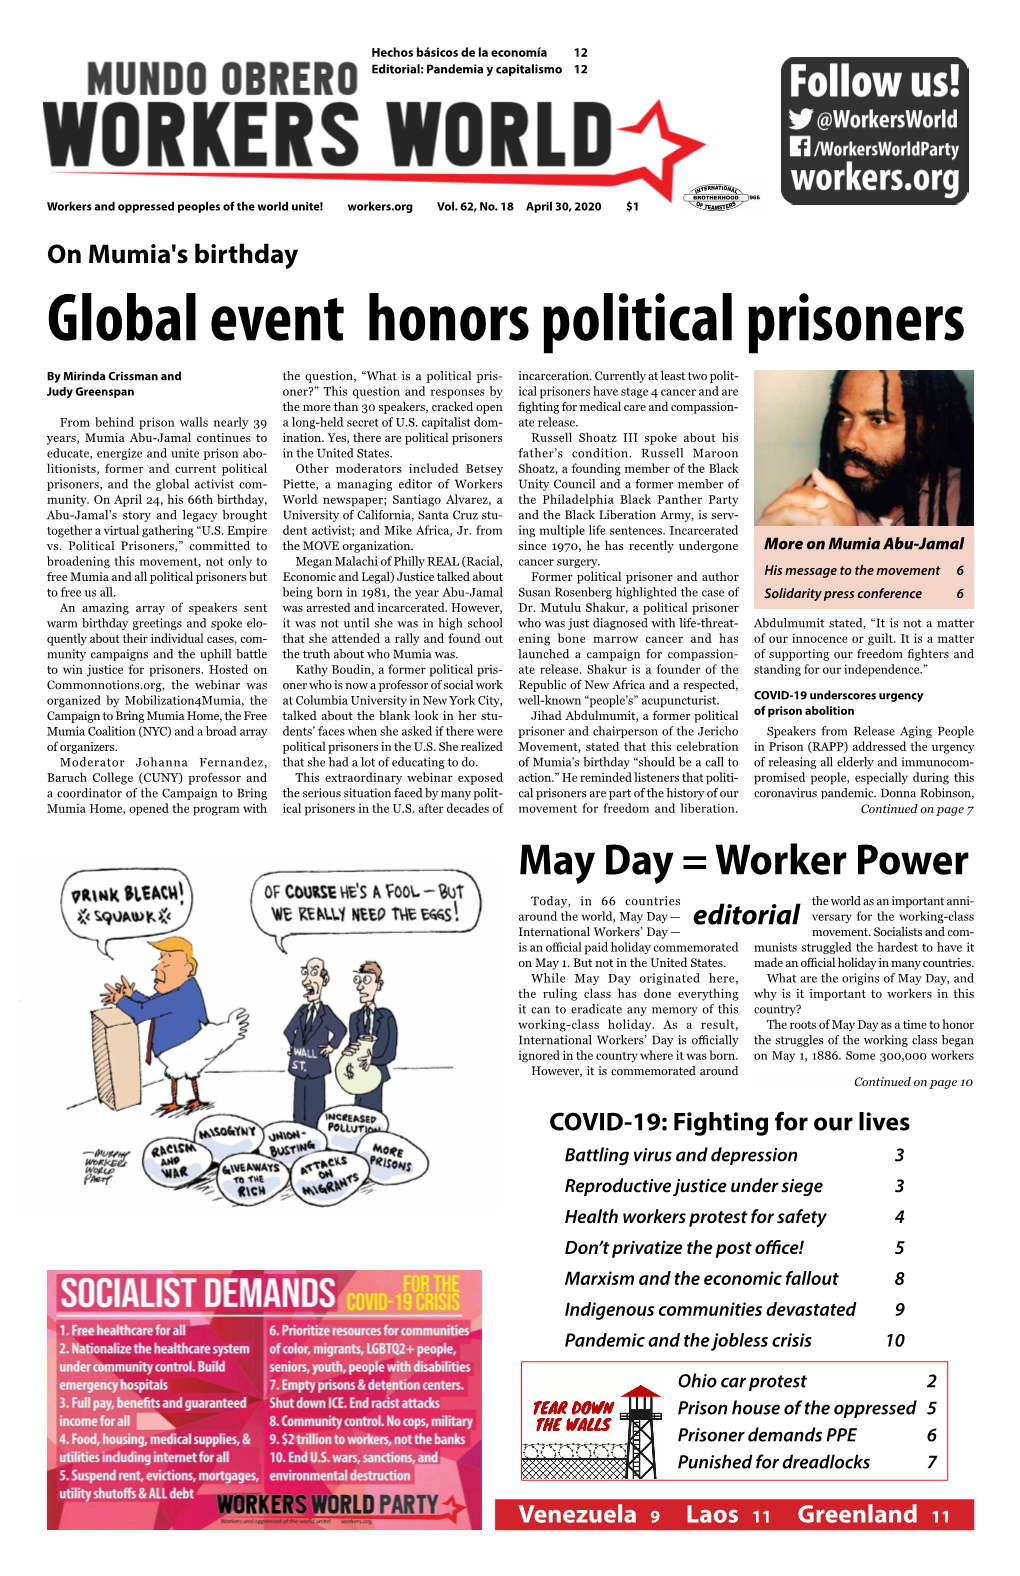 Global Event Honors Political Prisoners